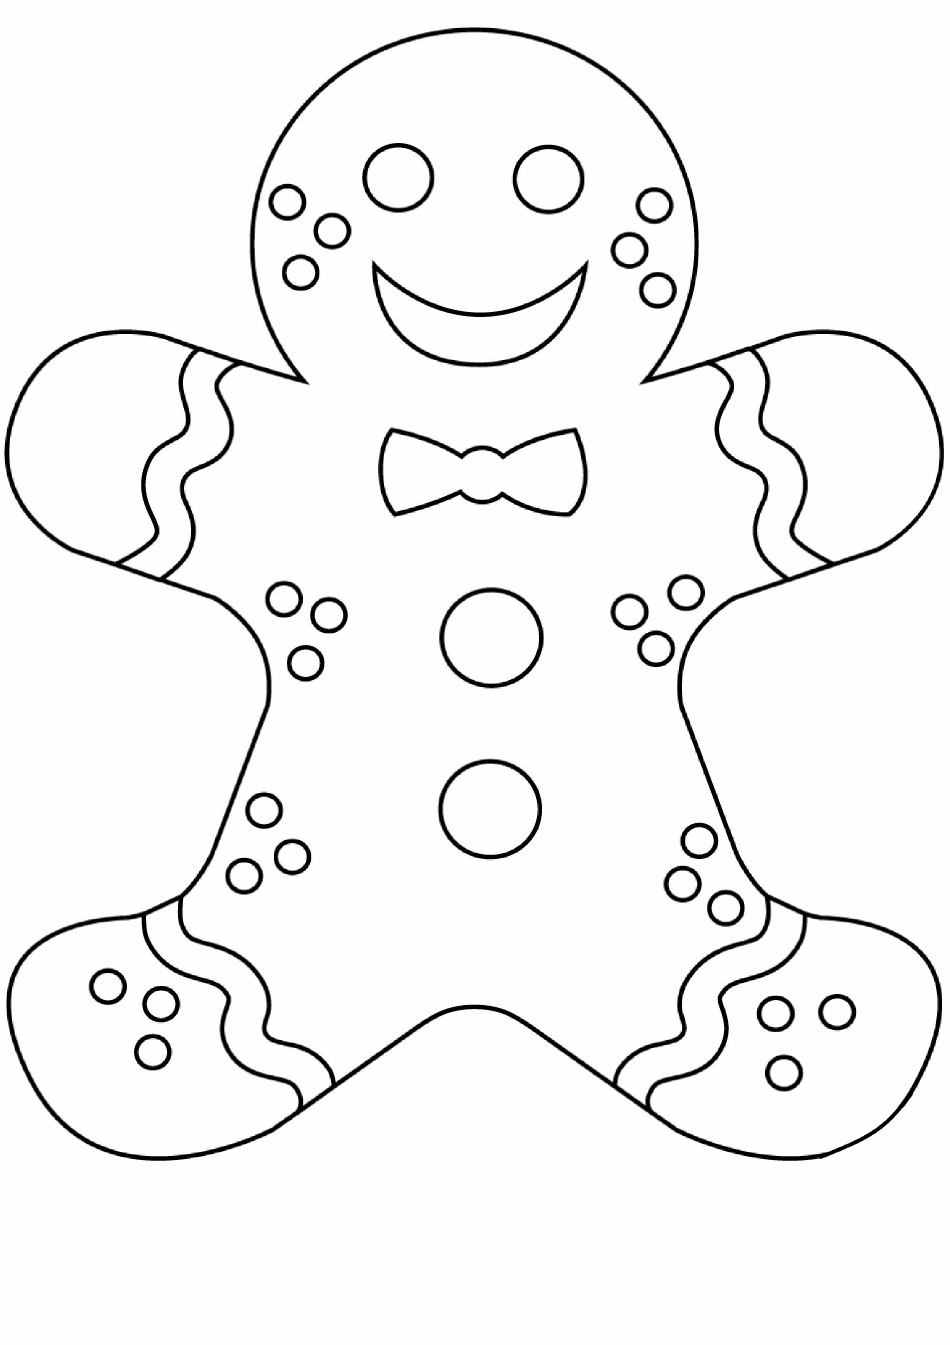 Gingerbread Man Coloring Page - Big Size